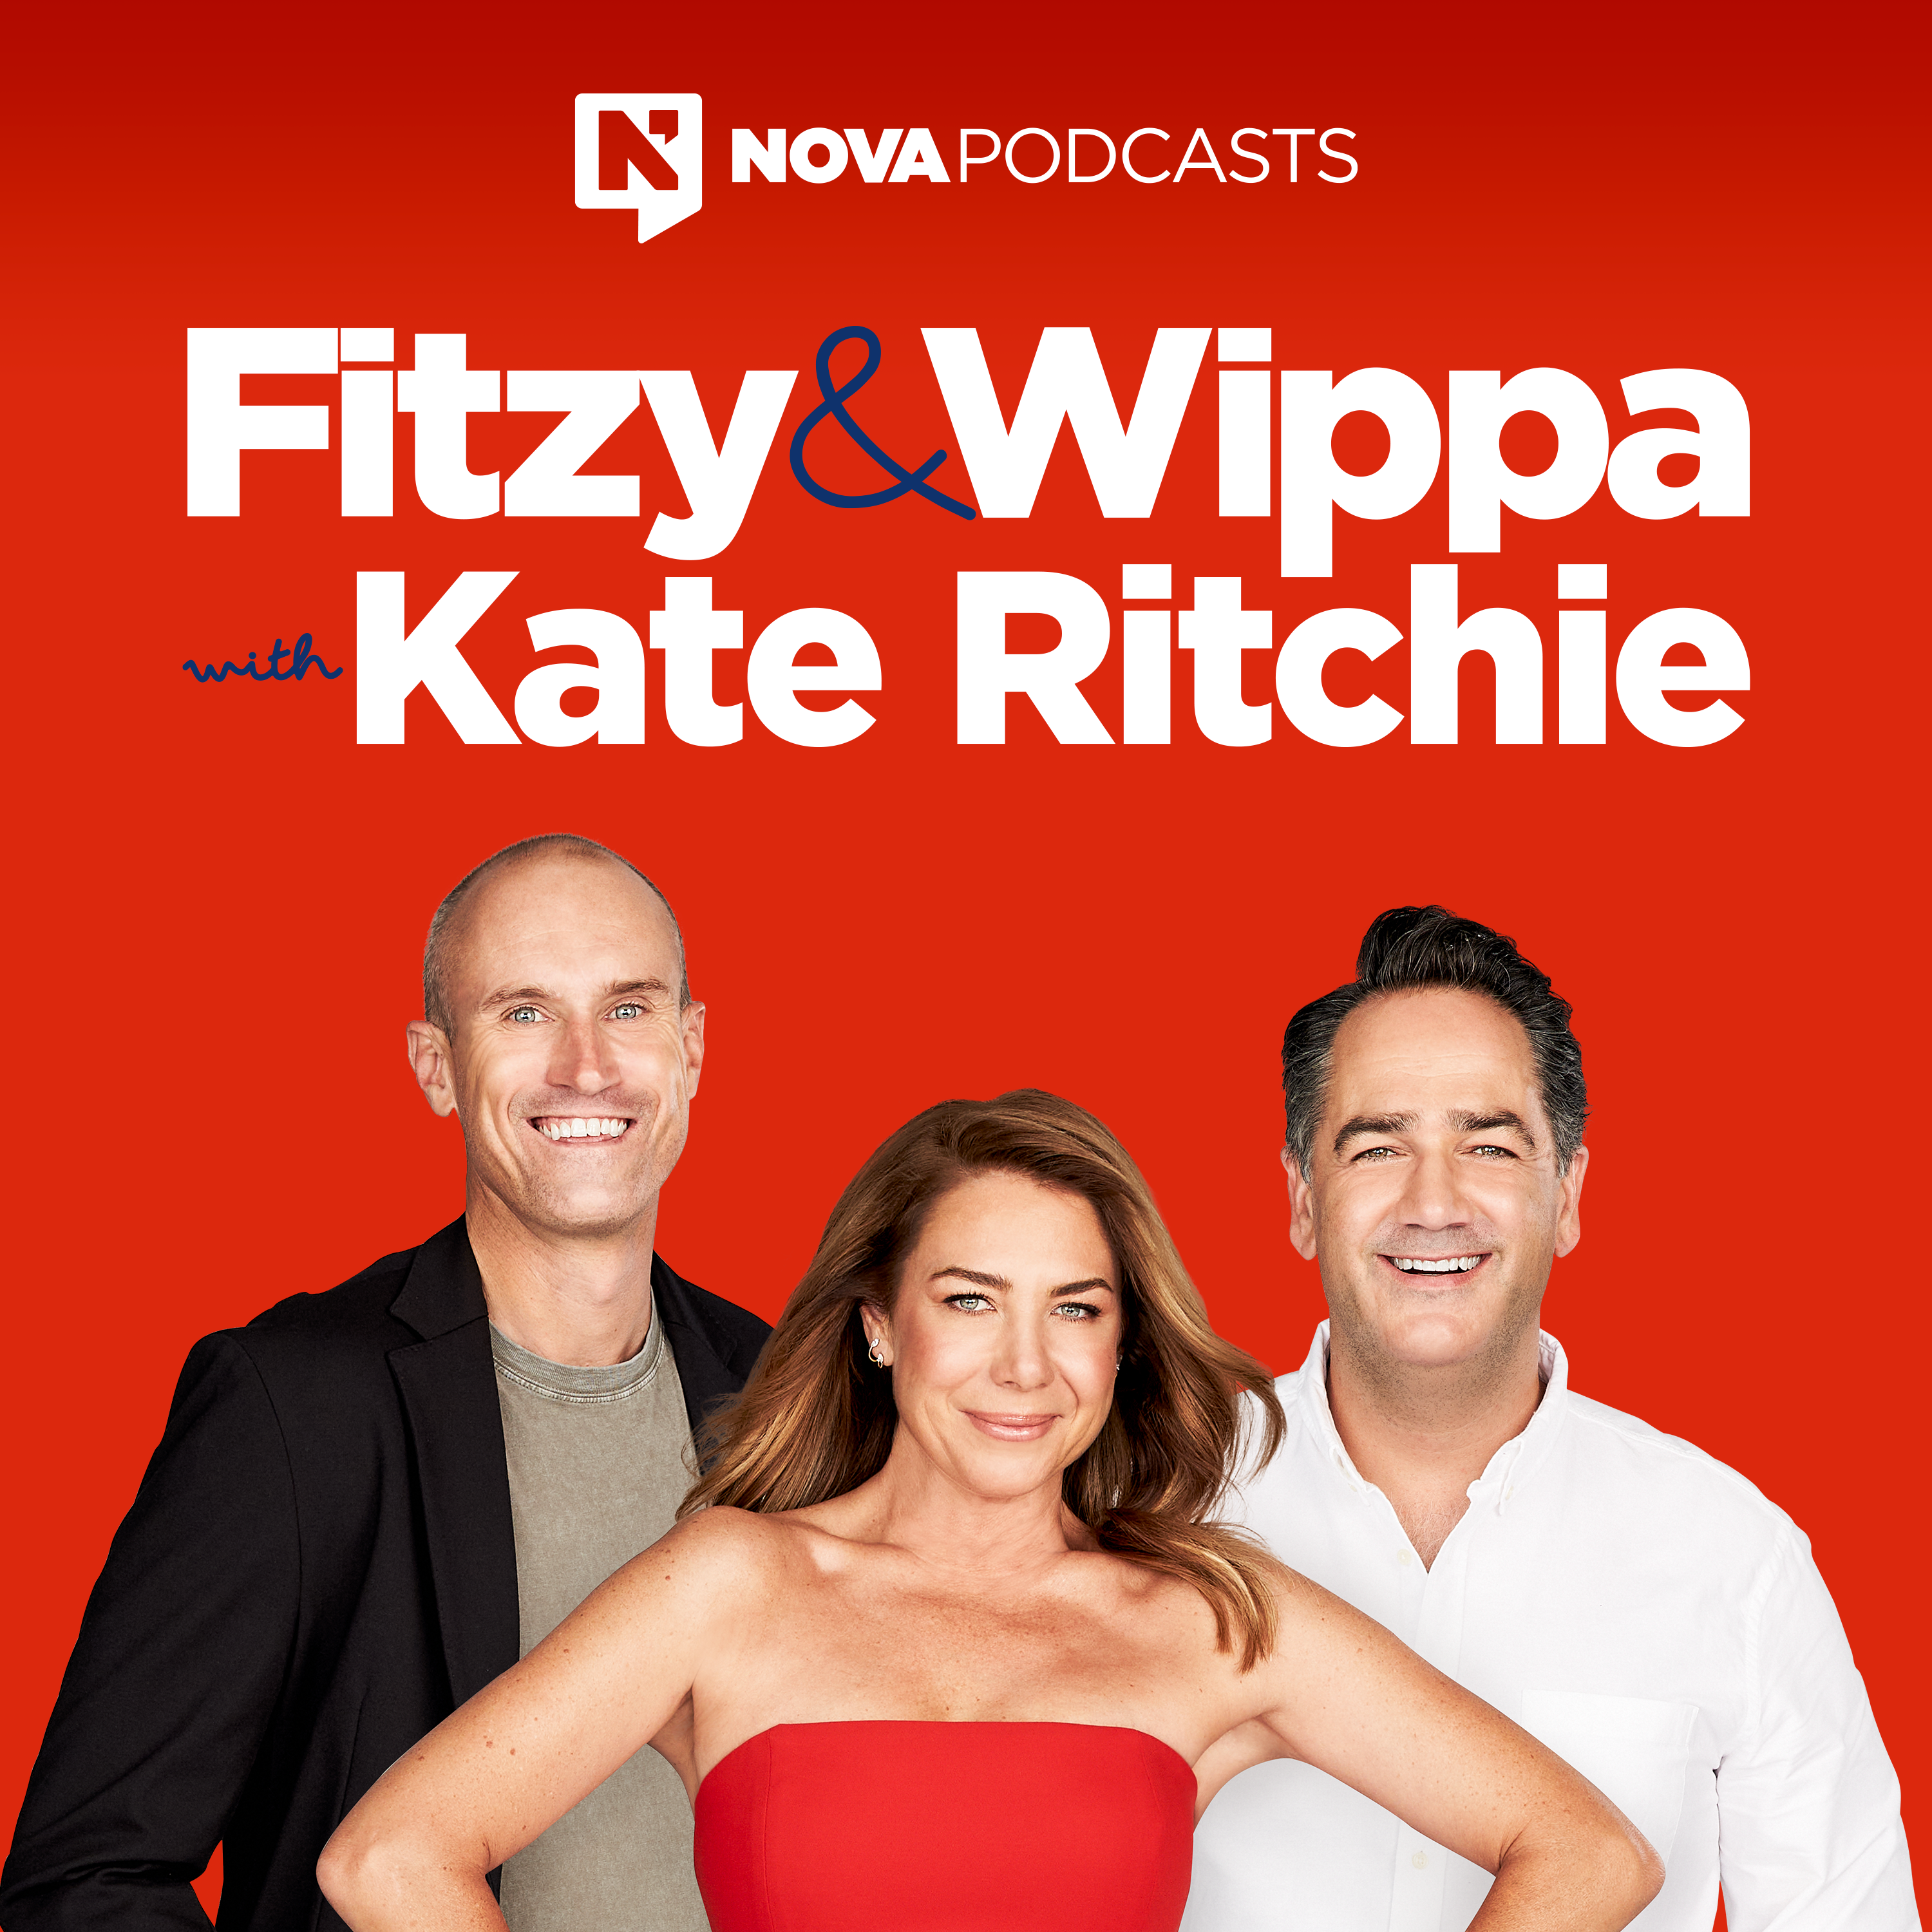 BEST BITS: What’s The Secret Code We Use Around The Office To Describe Wippa?